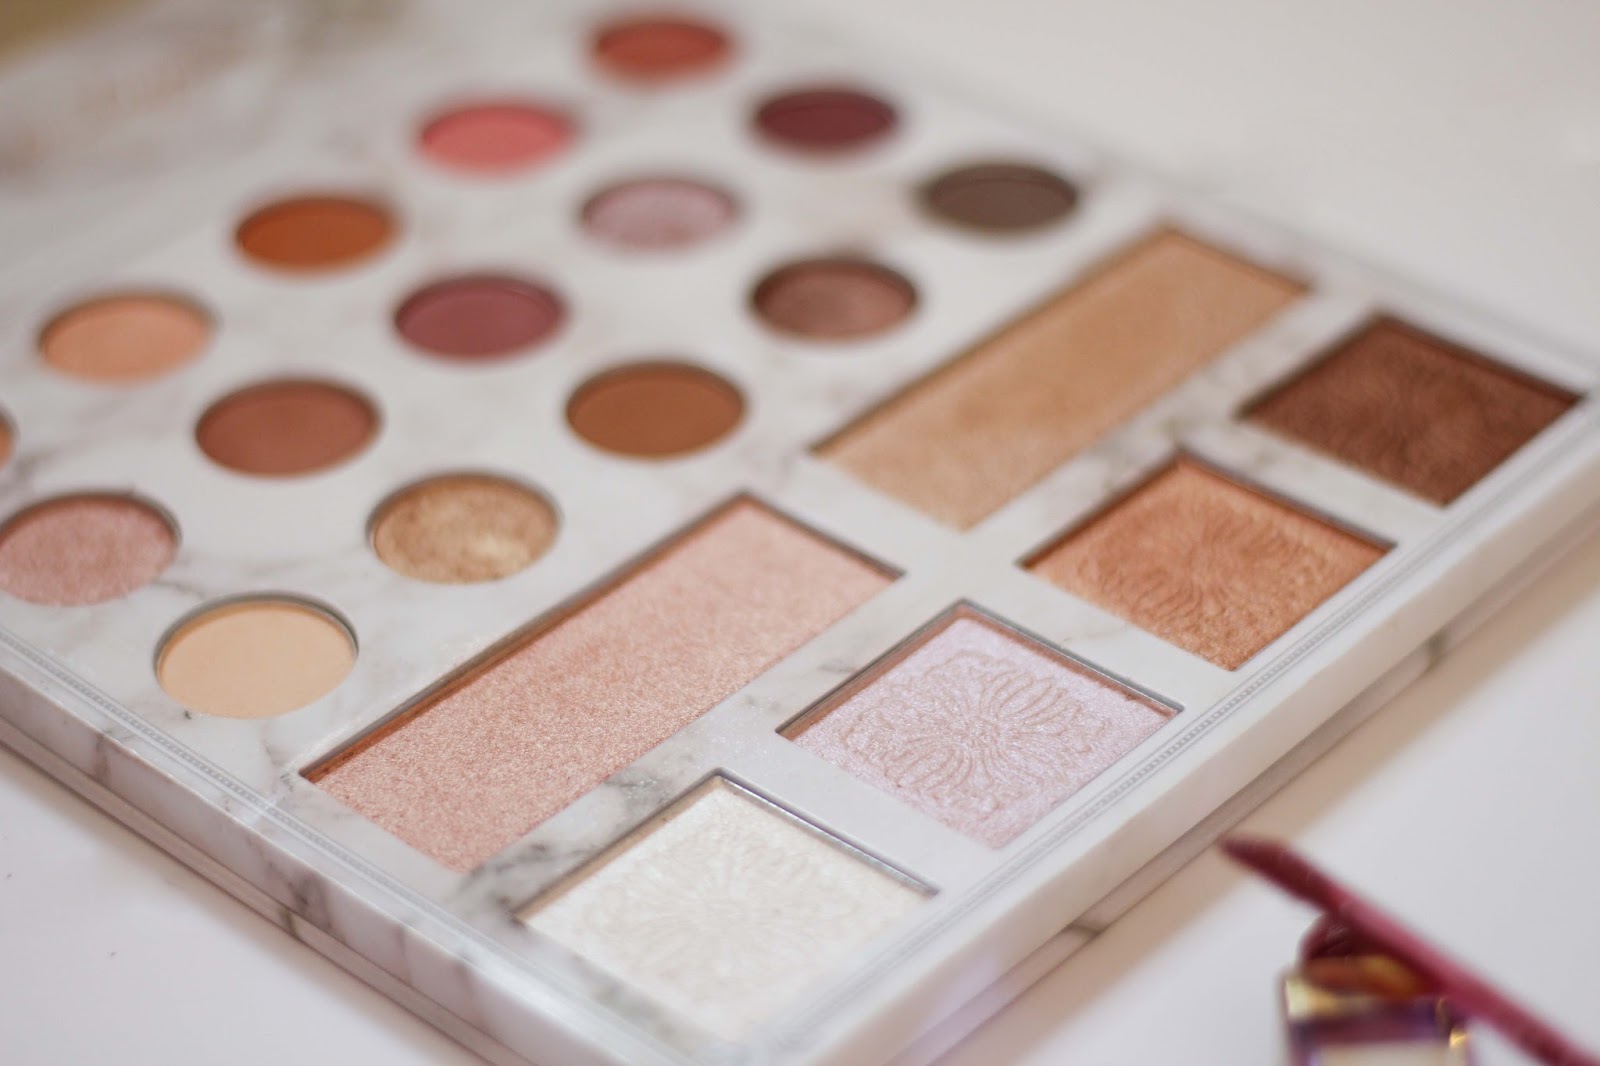 The Perfect Mauve Halo Eye With The Carli Bybel Deluxe Palette A